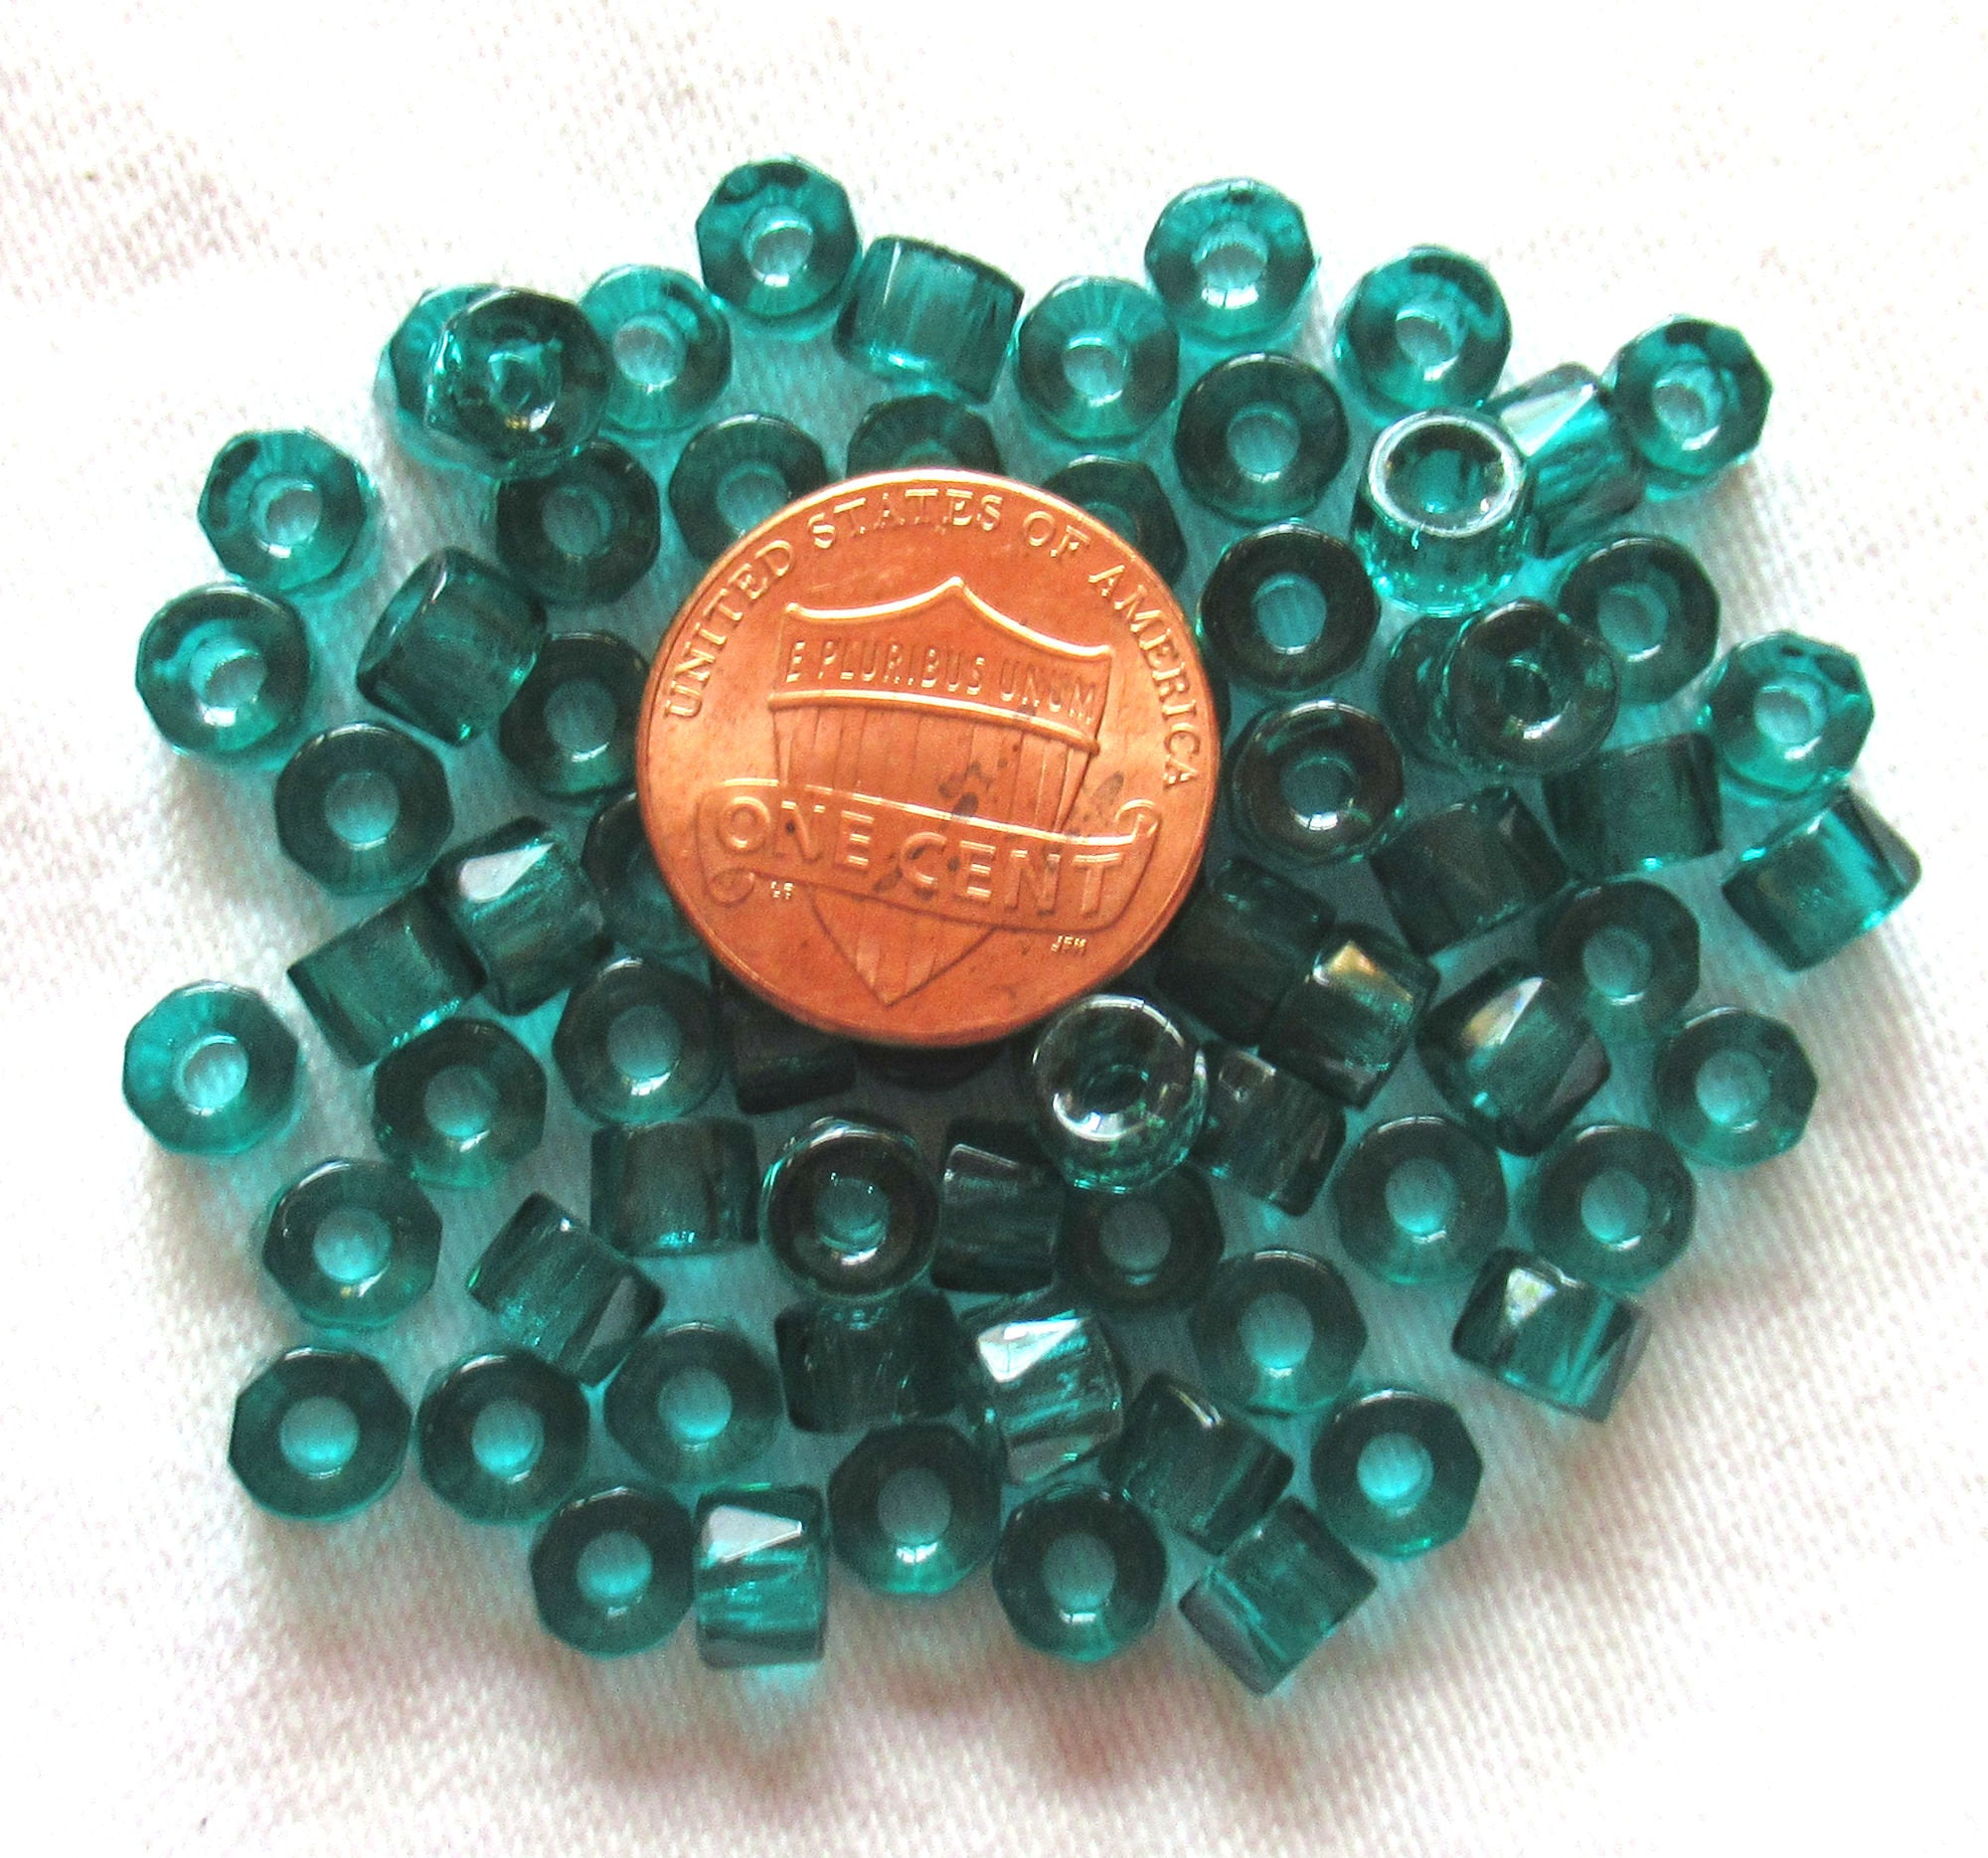 25 9mm Czech opaque turquoise blue pony roller beads, large hole blue glass  crow beads, C3525 – Glorious Glass Beads